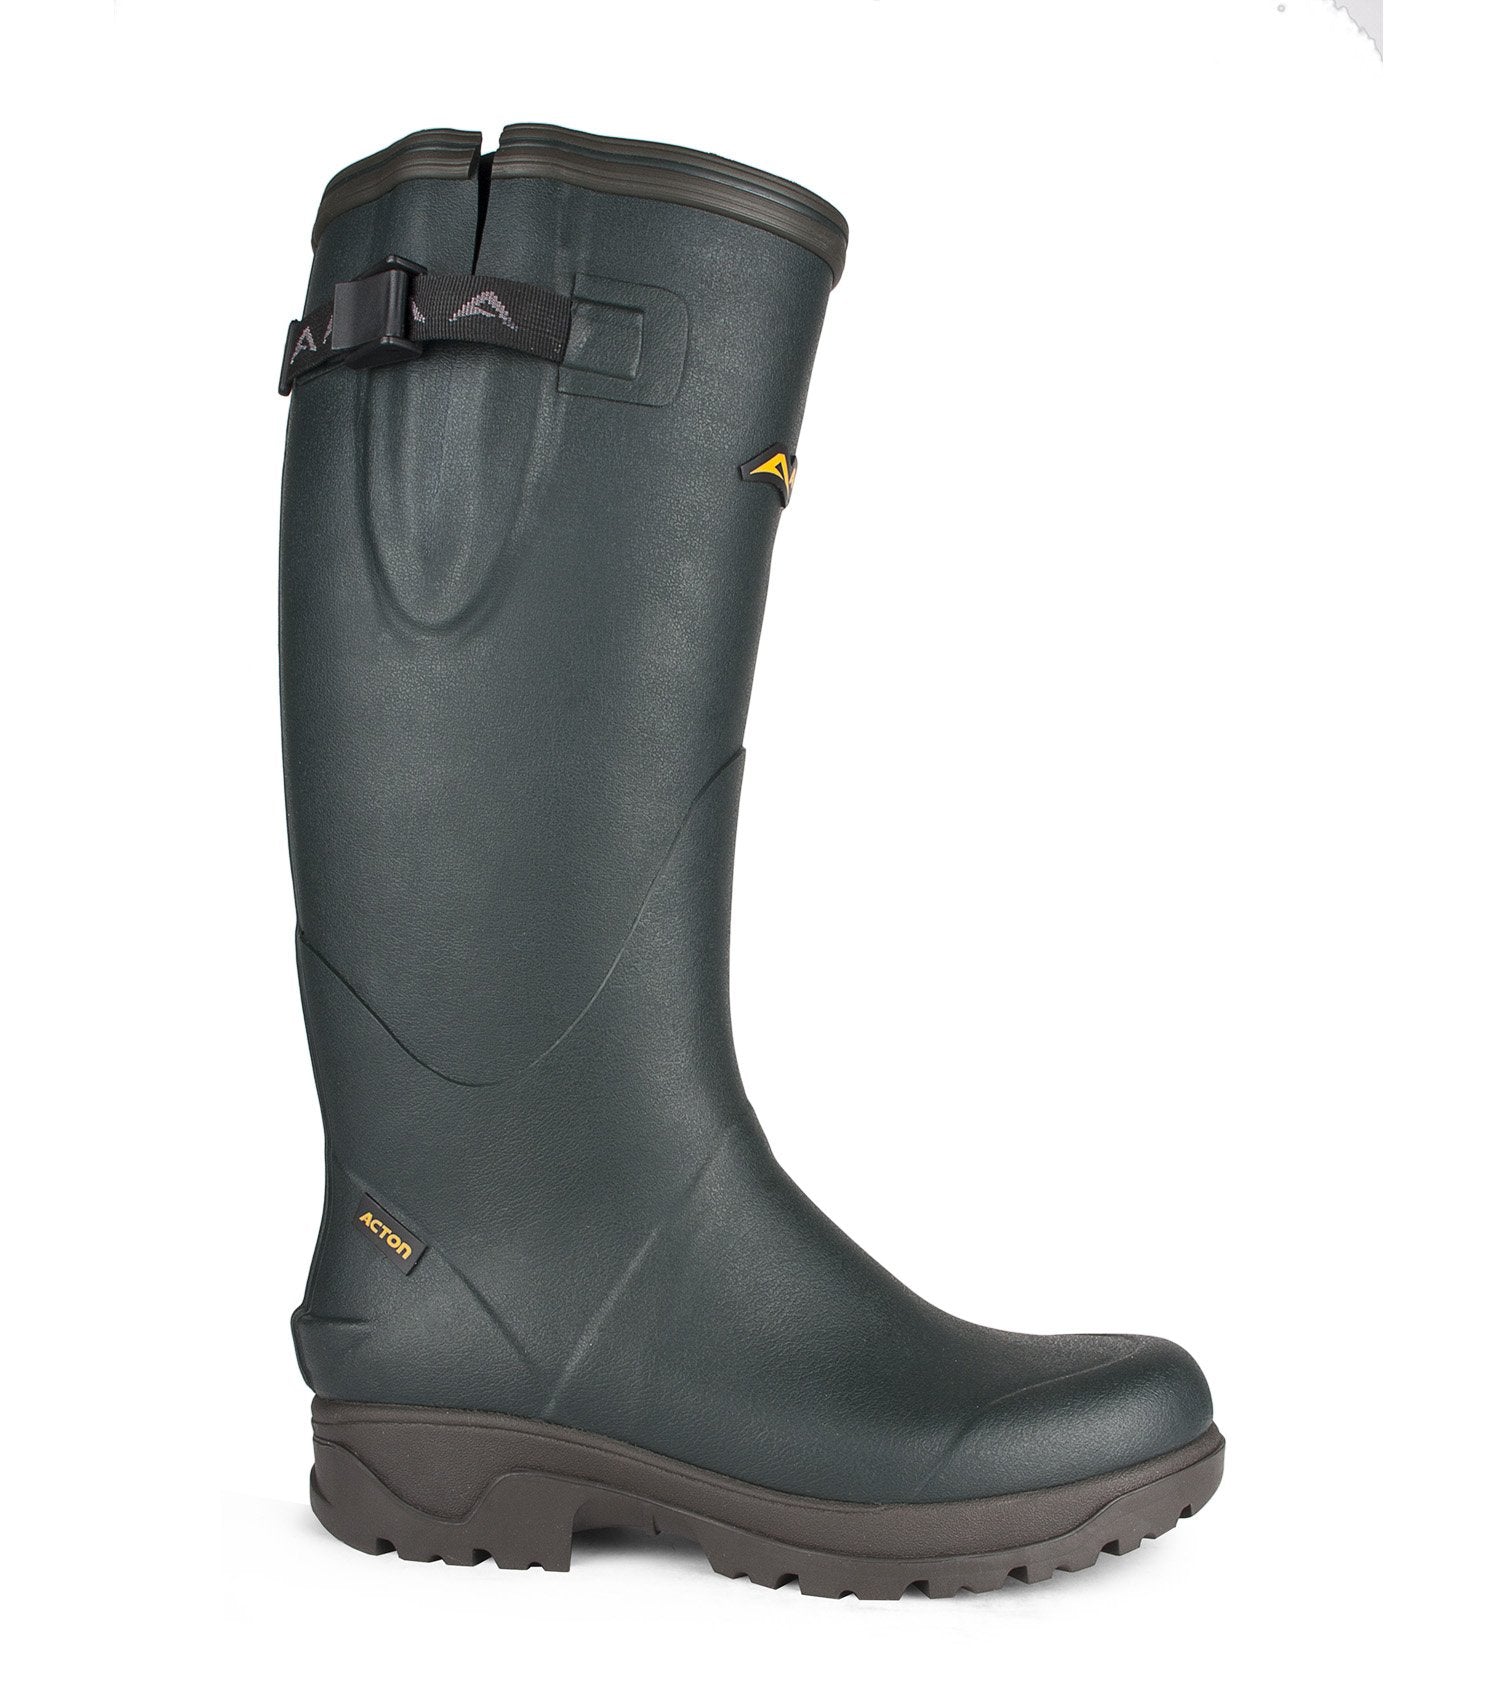 Acton Tackle Plain Toe Outdoor Boots | Forest Green | Sizes 4 - 13 Work Boots - Cleanflow